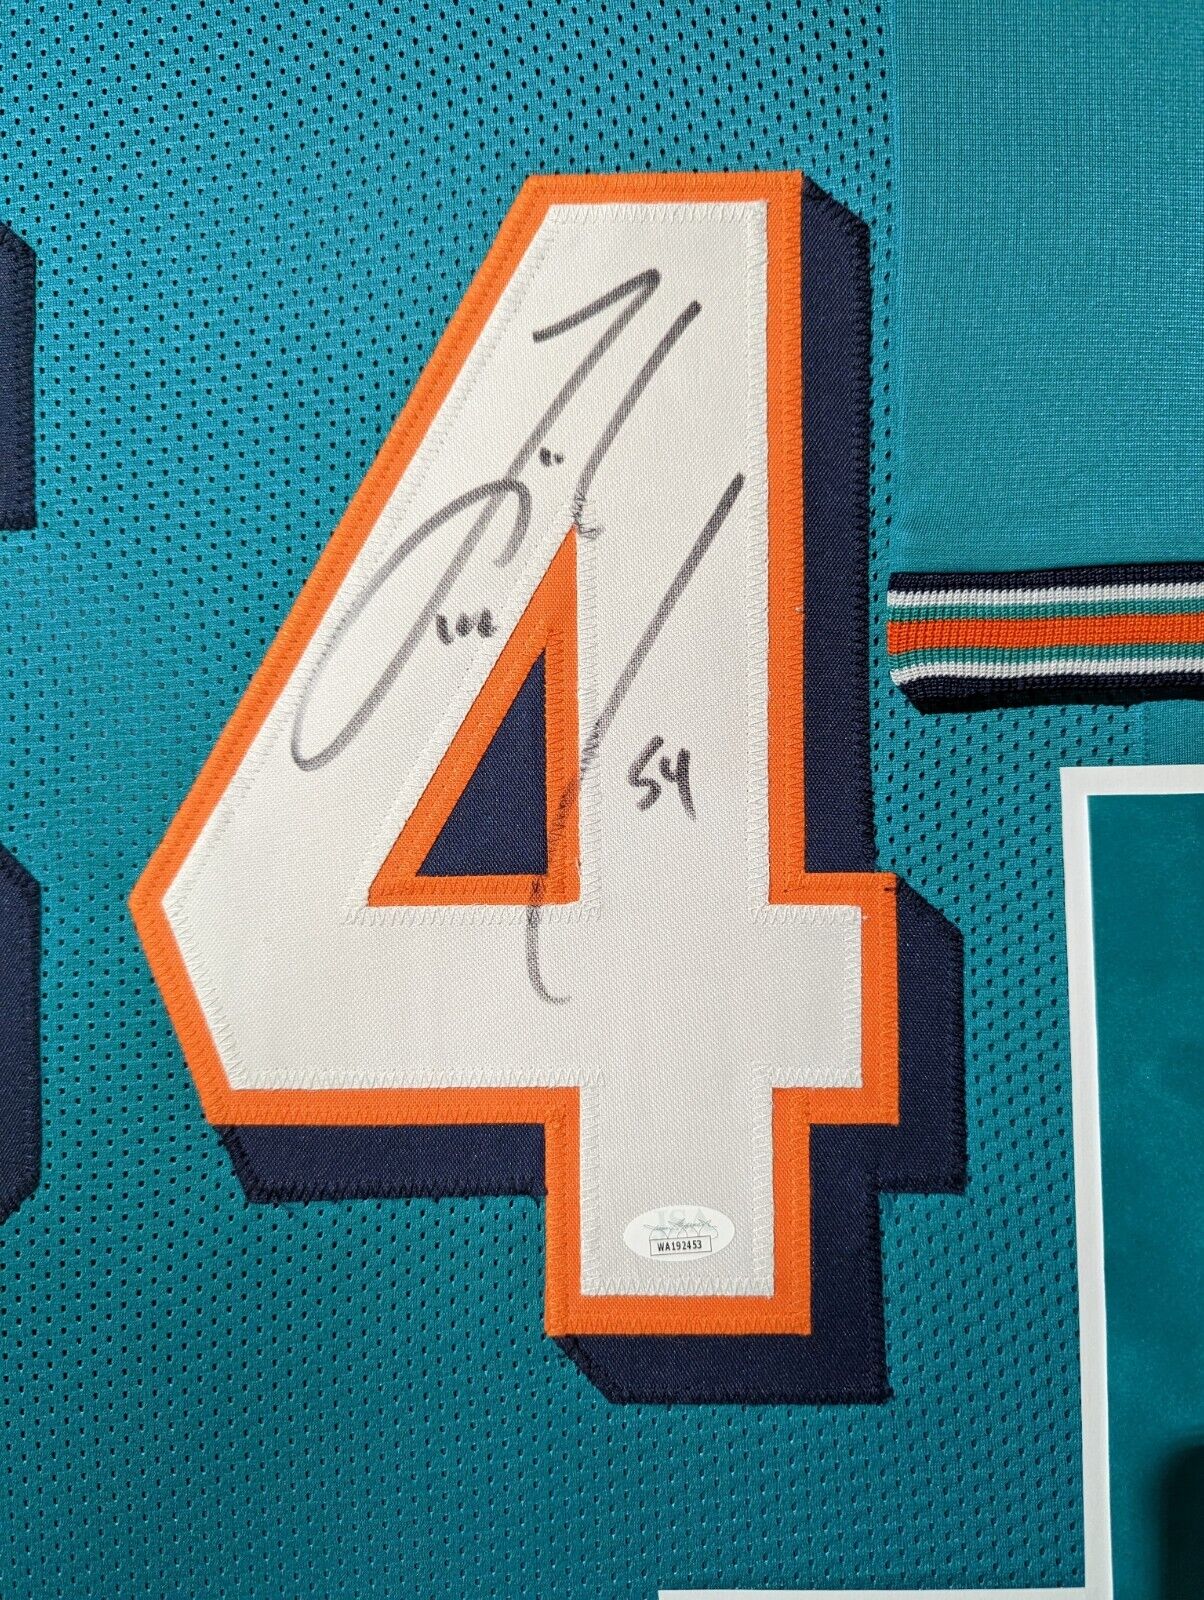 MVP Authentics Framed In Suede Miami Dolphins Zach Thomas Autographed Signed Jersey Jsa Coa 765 sports jersey framing , jersey framing